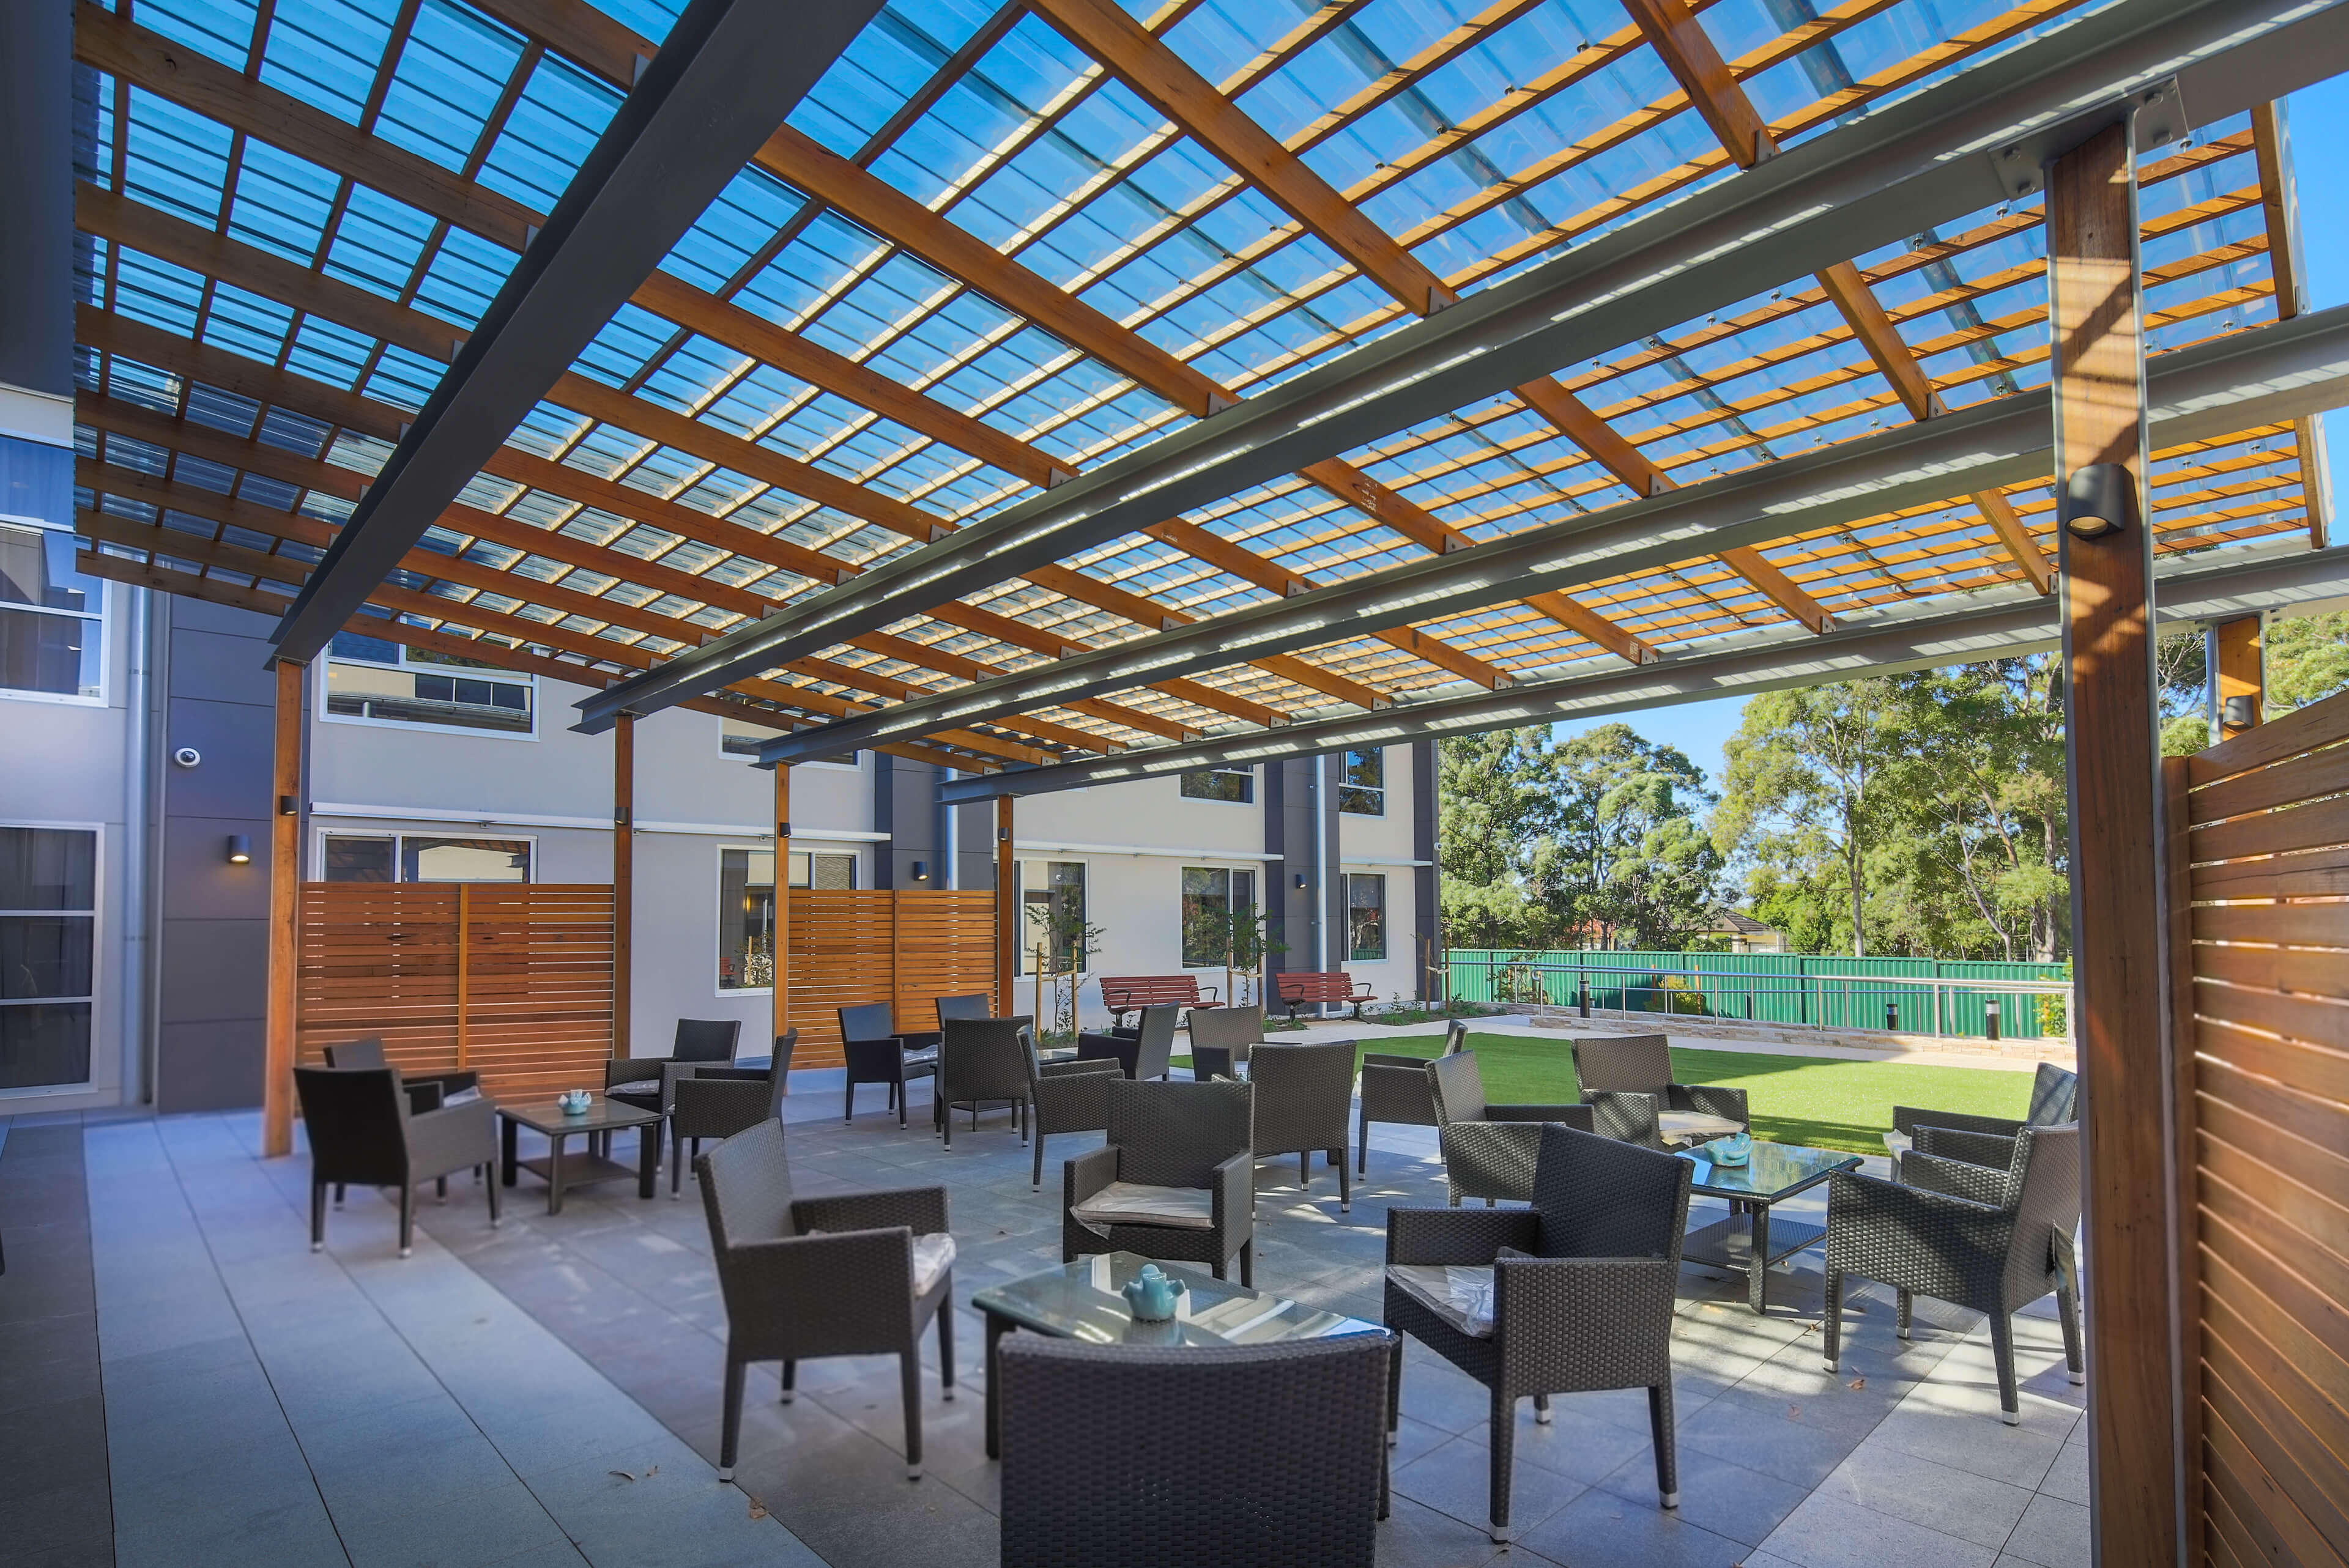 5 external entertaining courtyard bupa sutherland taylor construction health and aged care